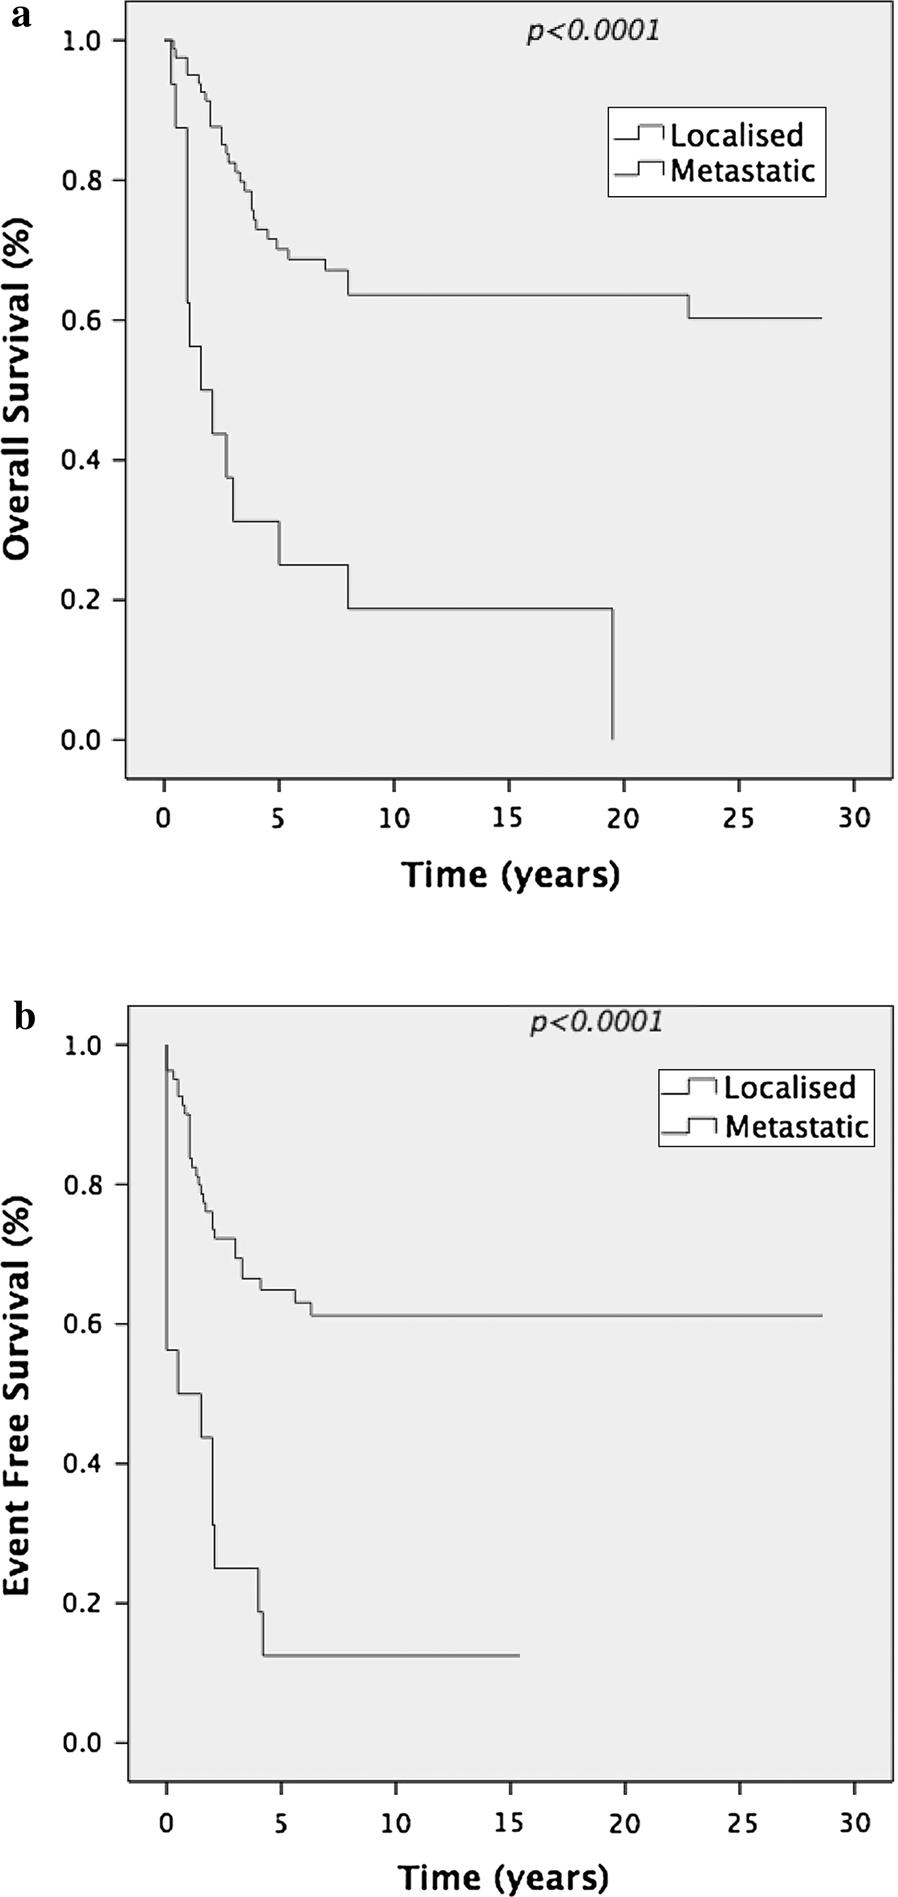 Page 4 of 8 Figure 1 a Overall survival in patients with localised disease versus metastatic disease. b Event free survival in patients with localised disease versus metastatic disease.